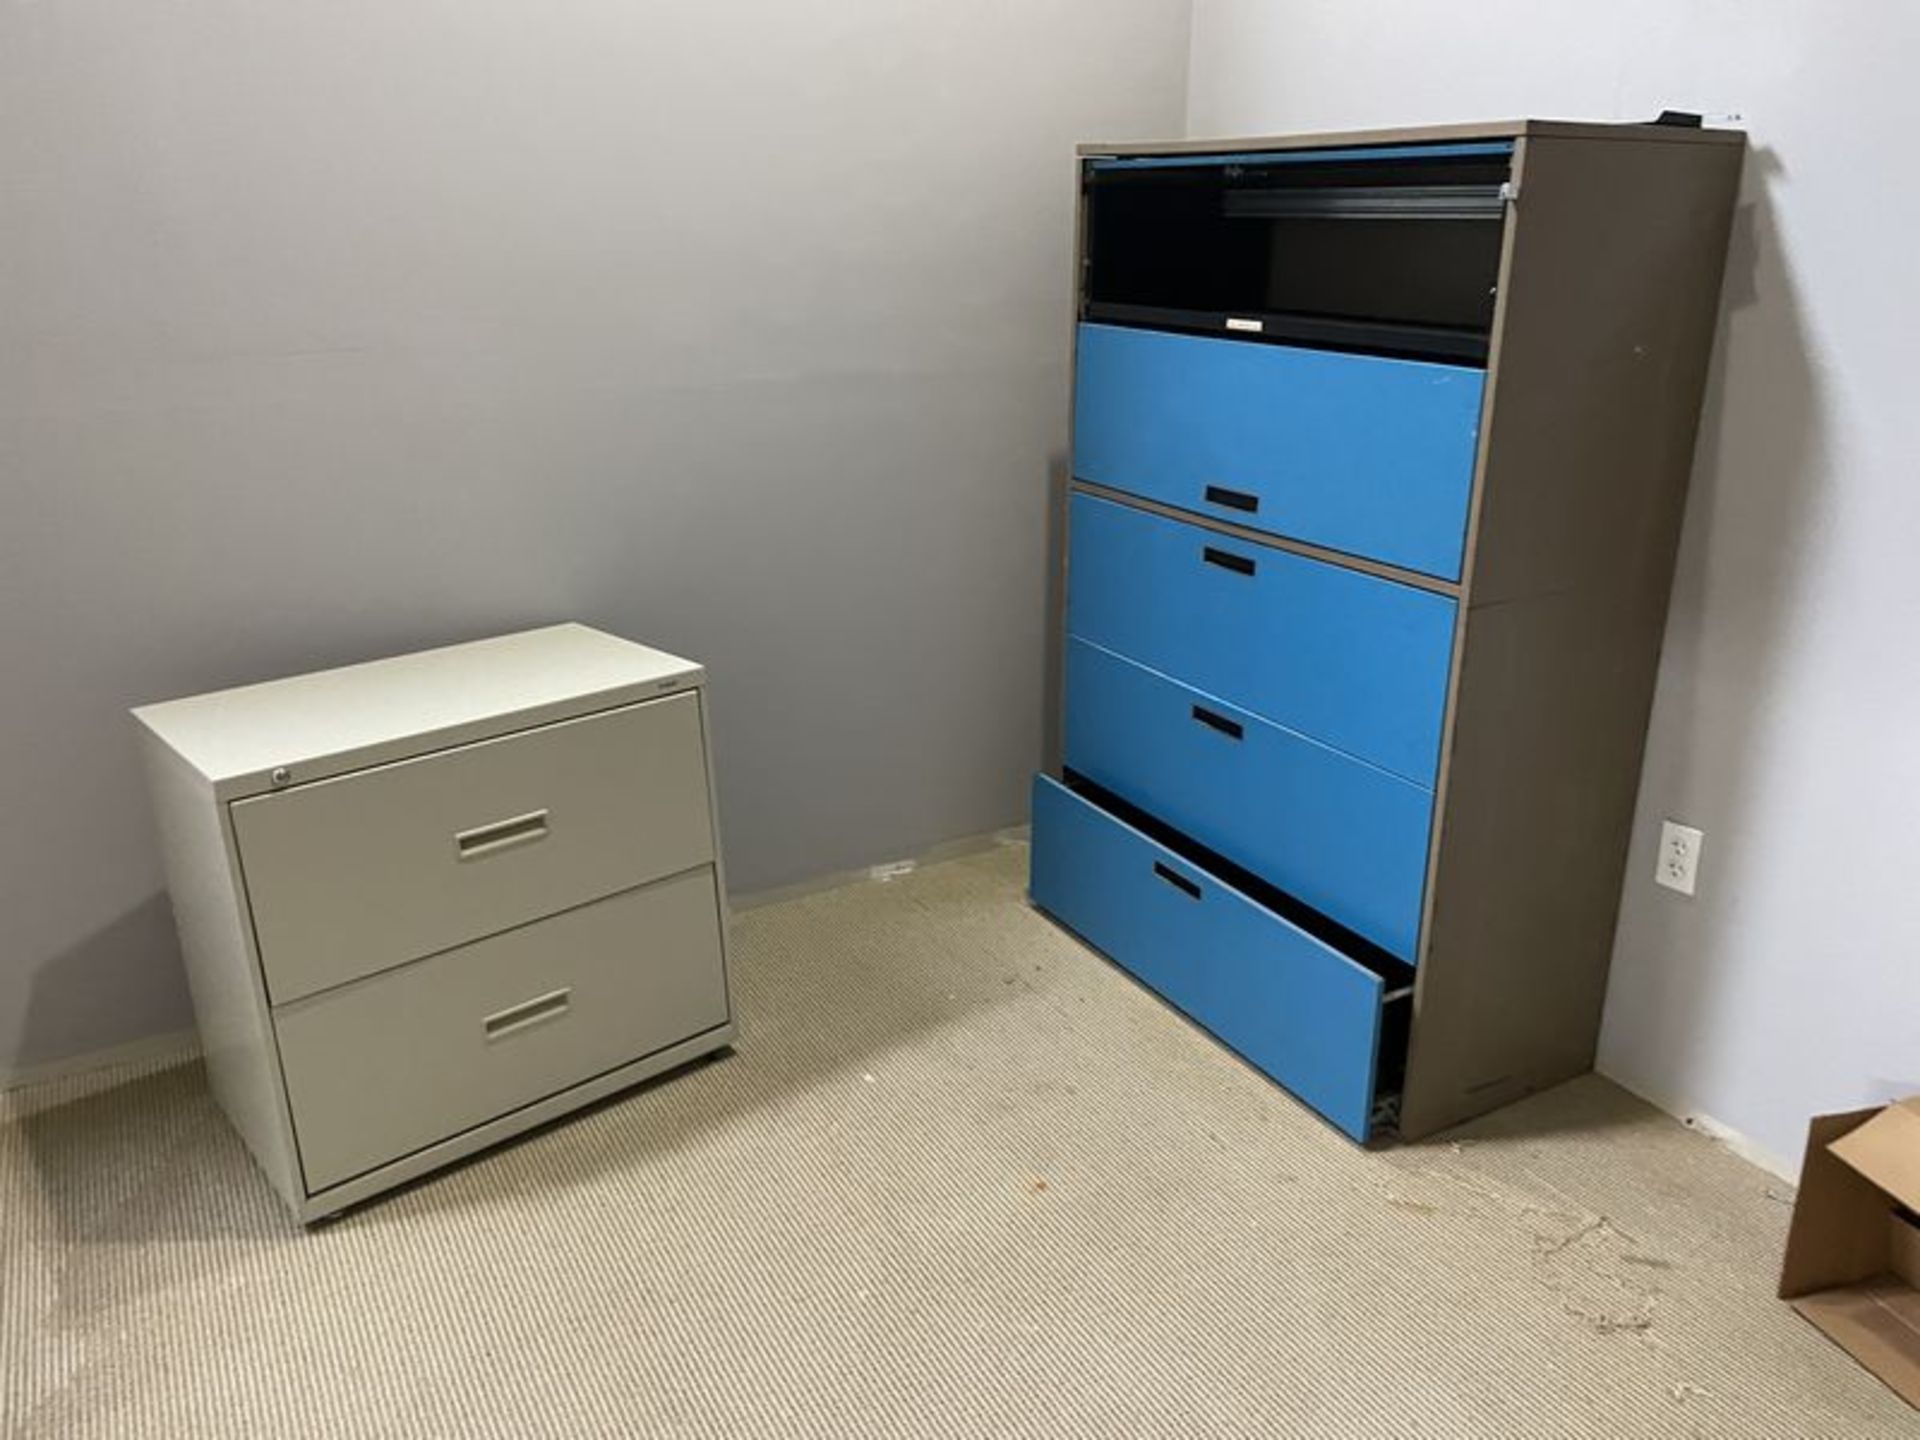 (Lot) Office C/O: (7) 2 Section Lateral, 5 Section Lateral, 3 Section Lateral, 4 Drawer File, and ( - Image 2 of 2